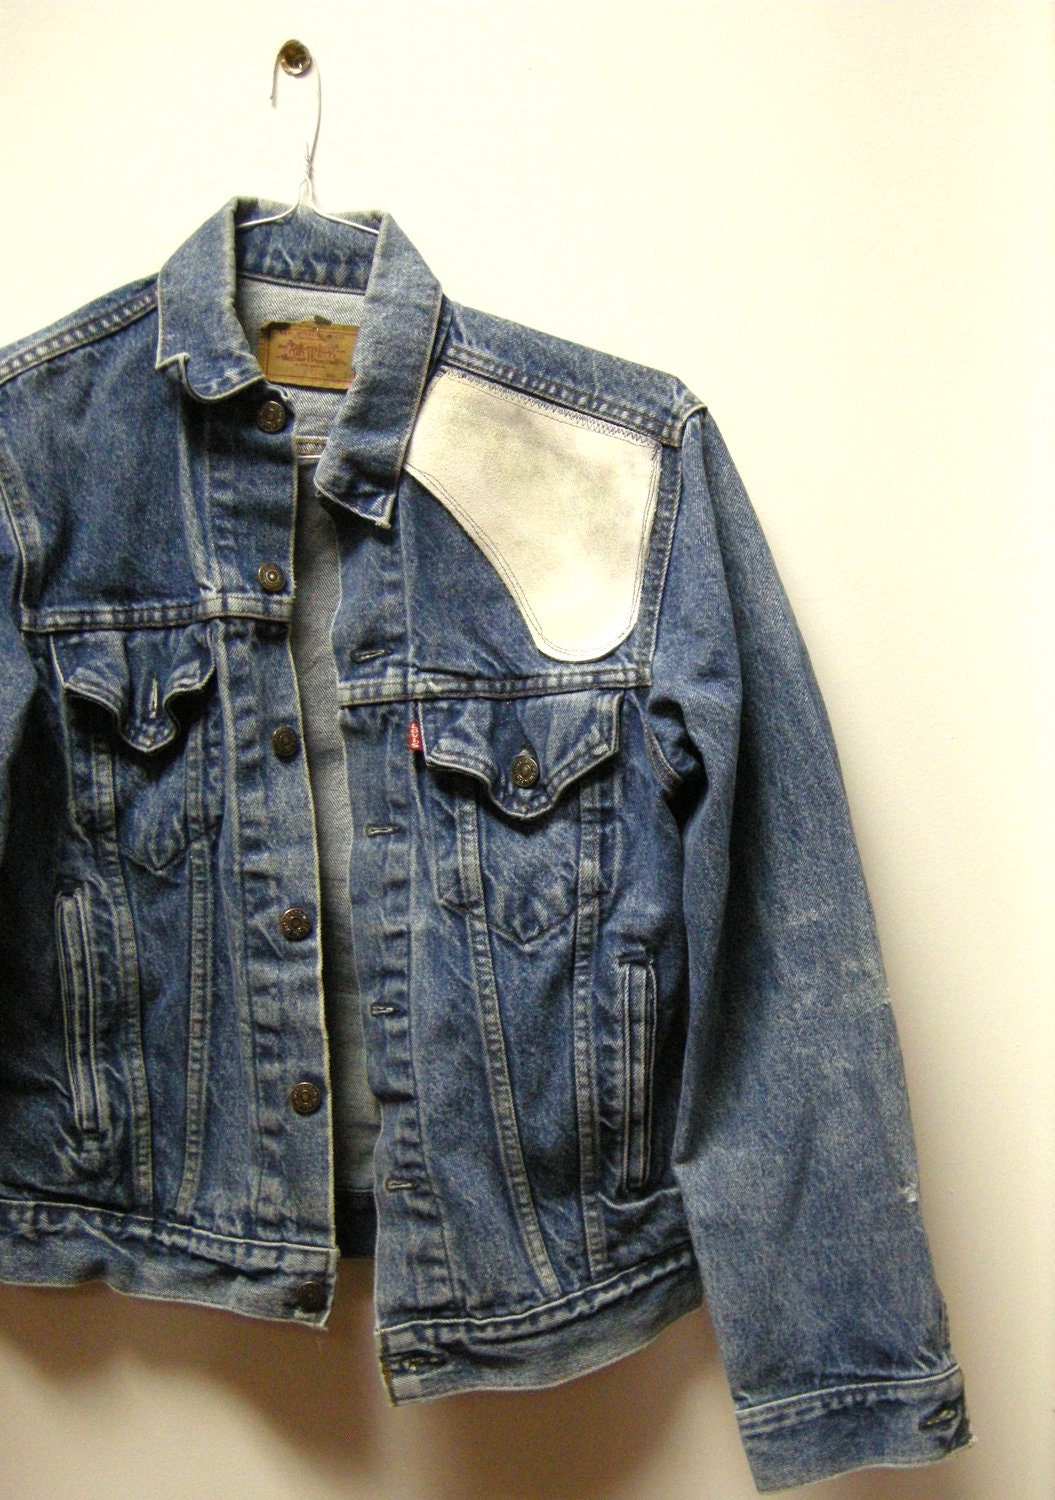 Men's Distressed Jean Jacket with White Leather Shoulder